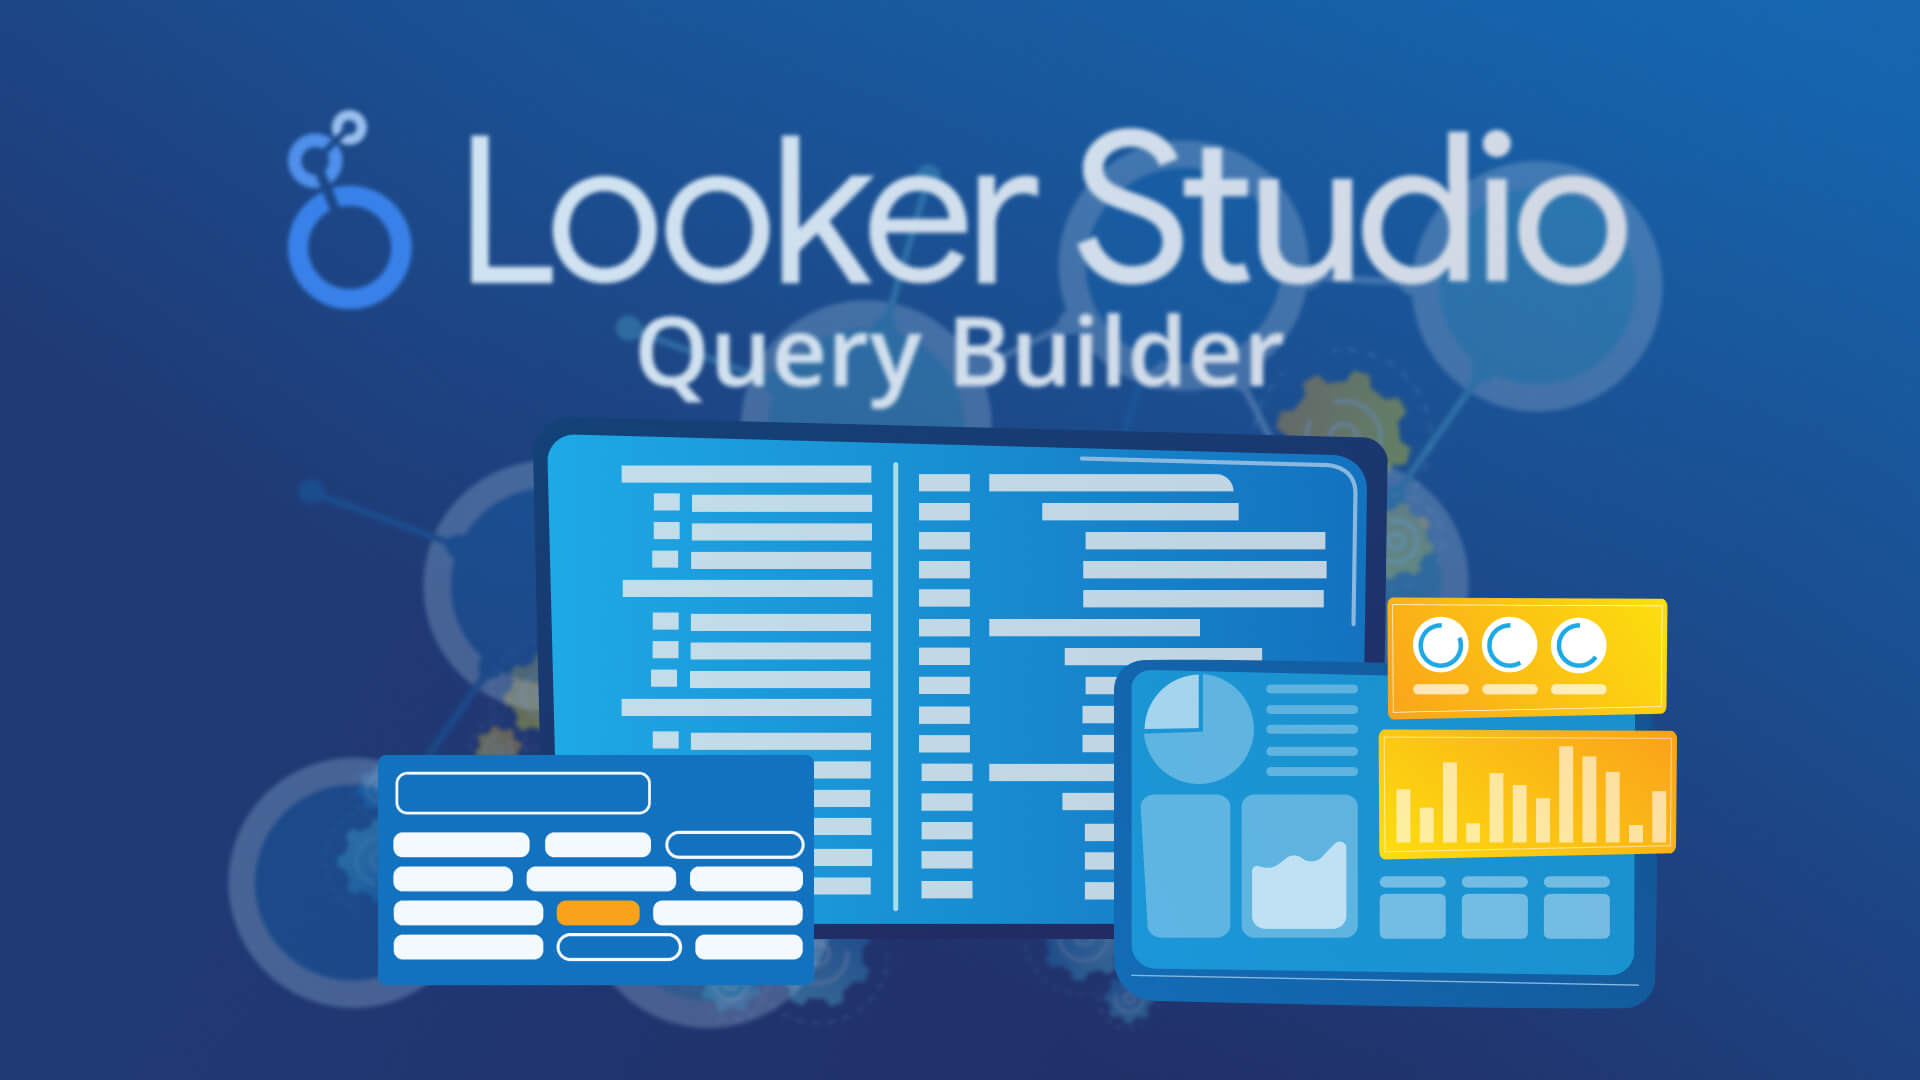 Create regex code for keyword classification on Google Looker Studio Query Builder